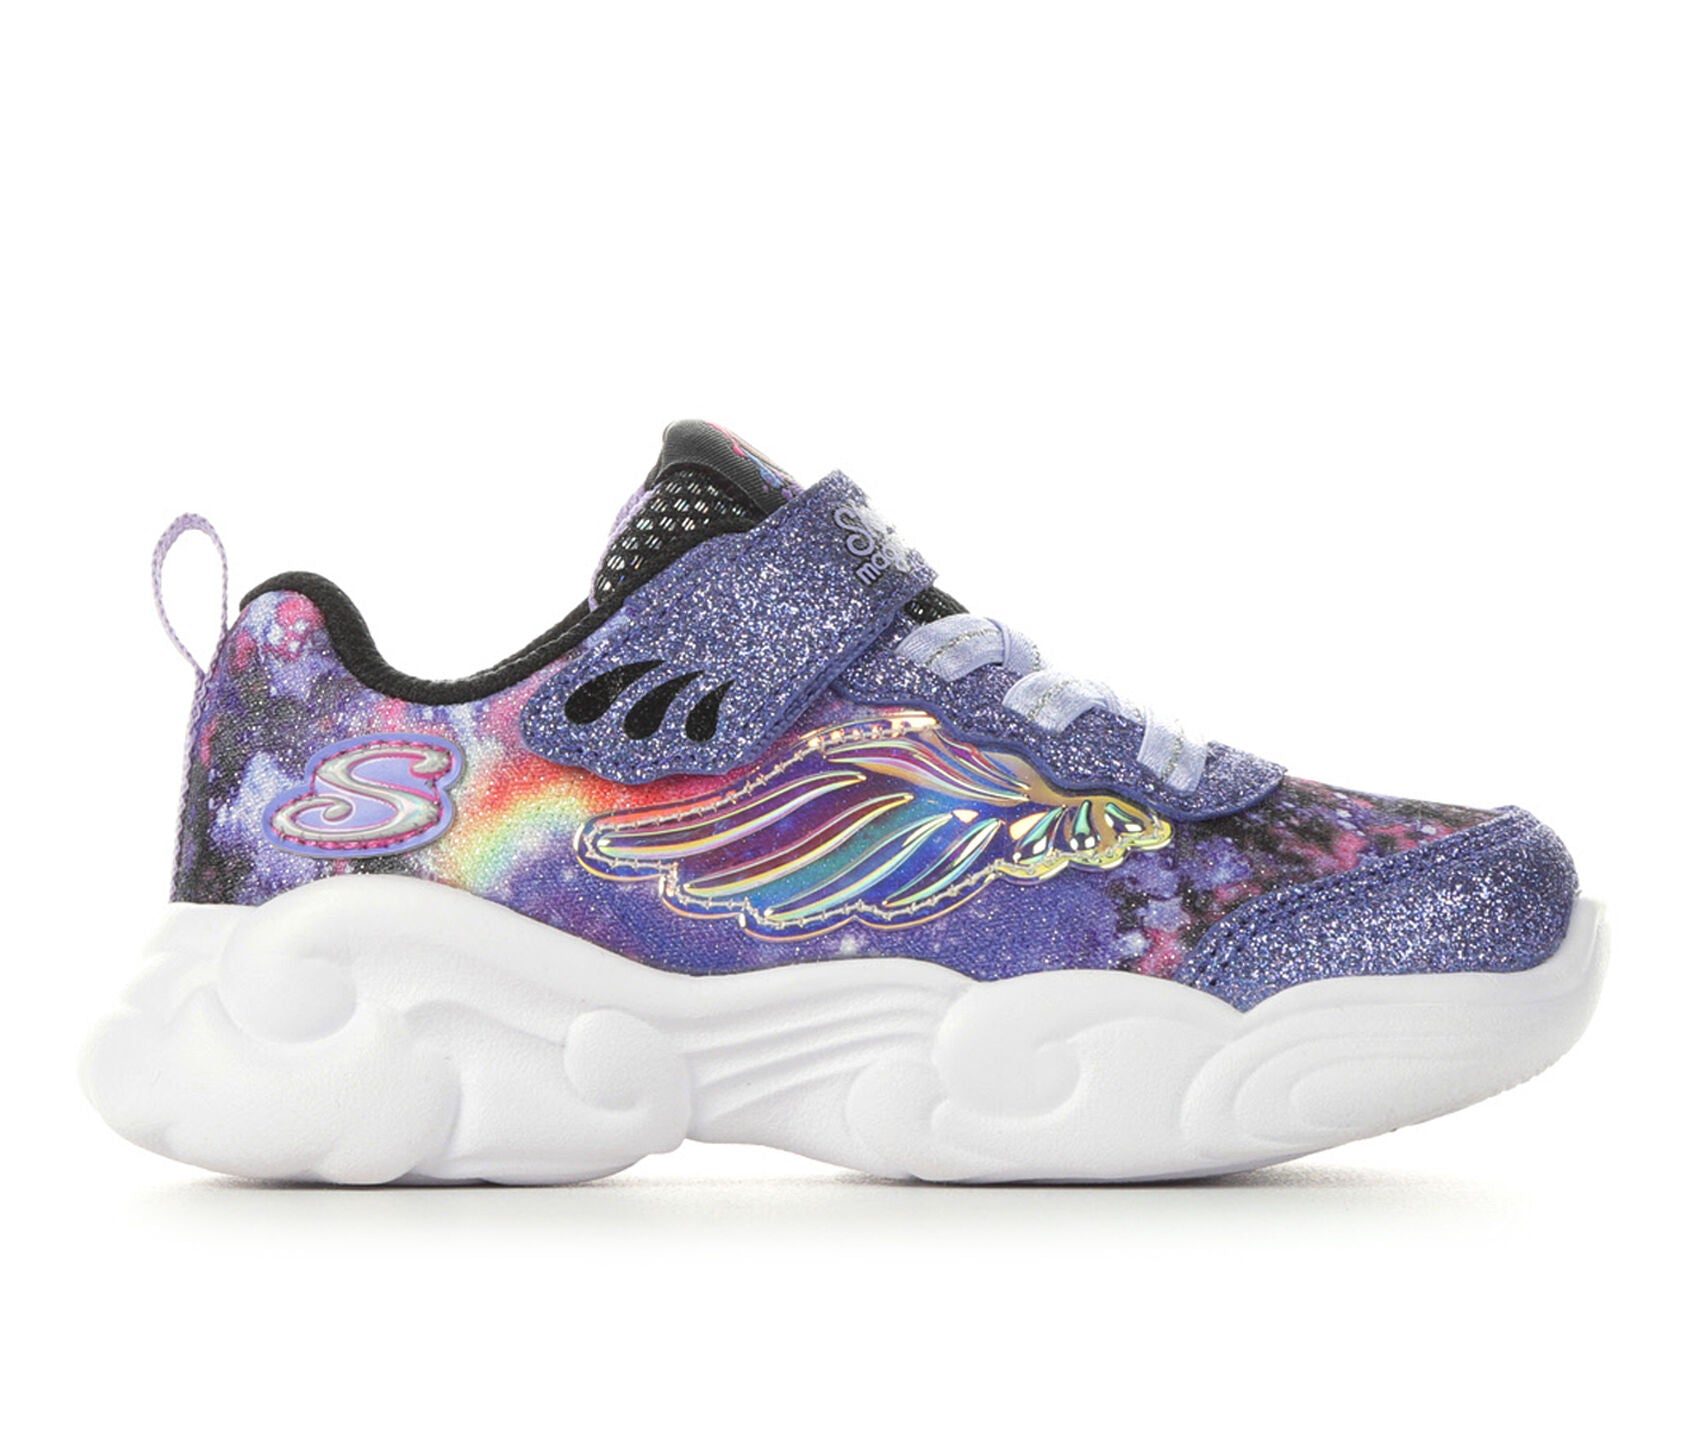 Skechers Magical Collection Unicorn Storm Purple Glitter Galaxy – Aura In Pink Inc.